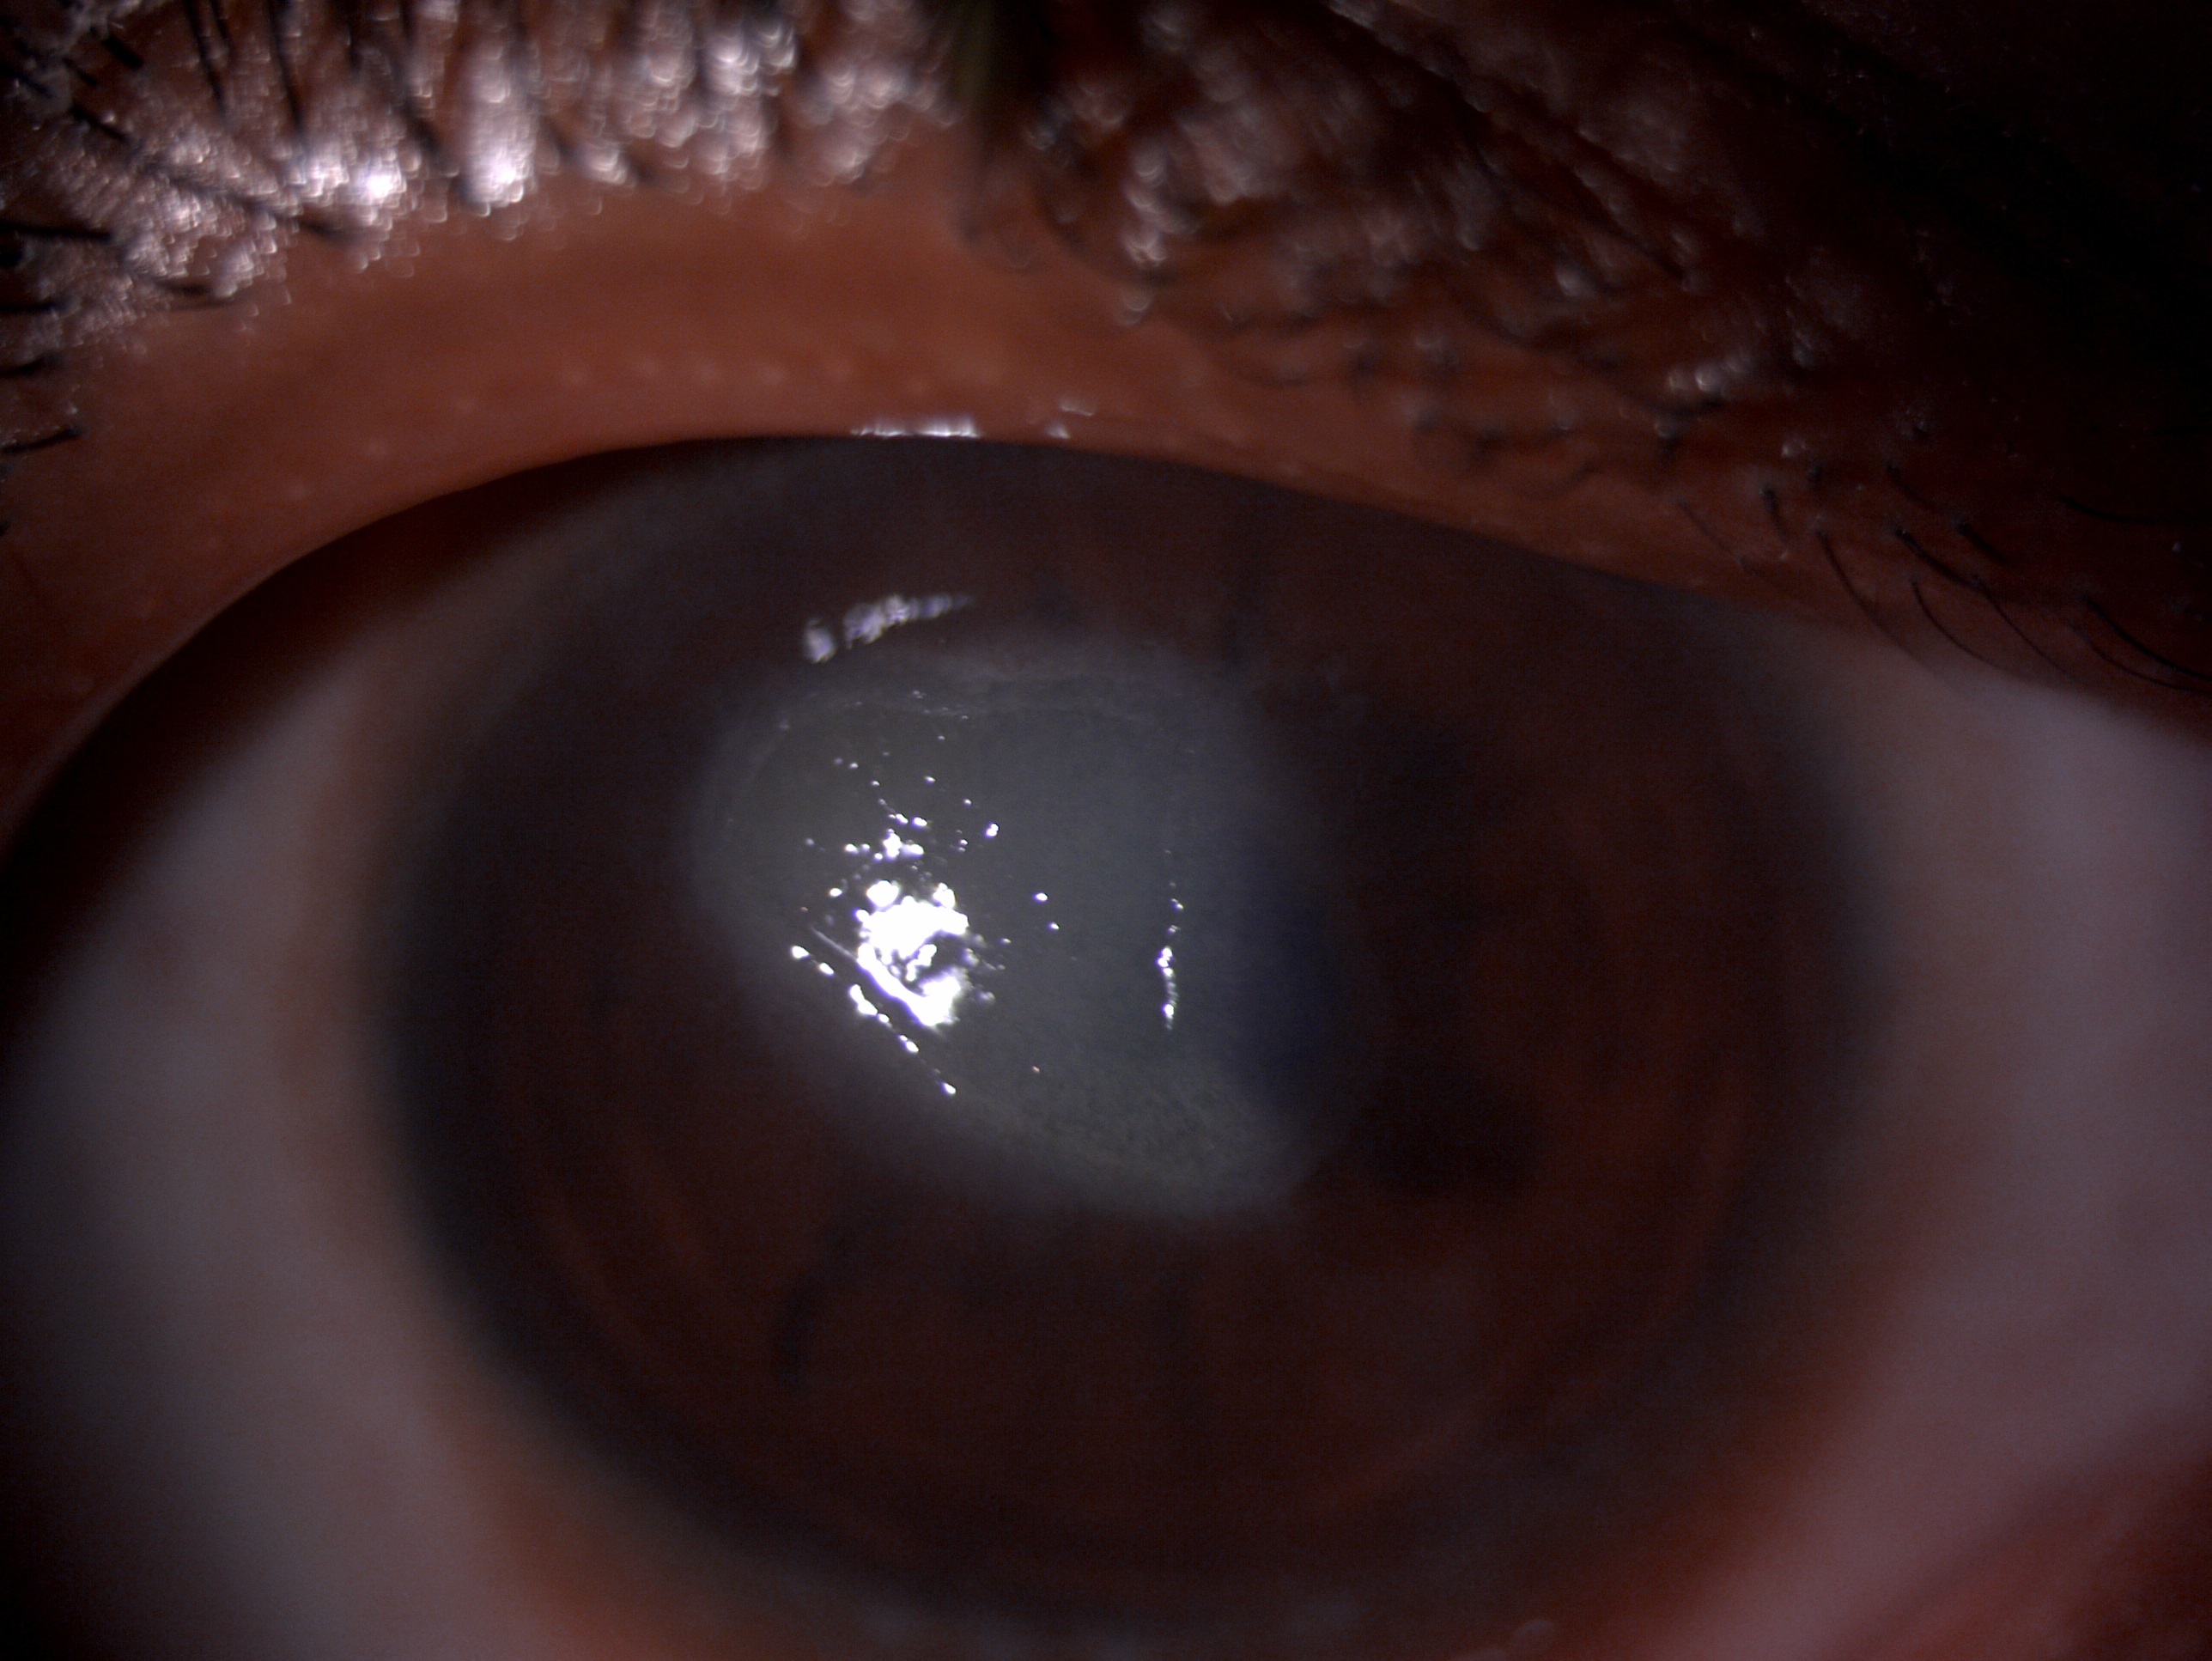 Slit lamp image of the patient depicting central corneal shield ulcer